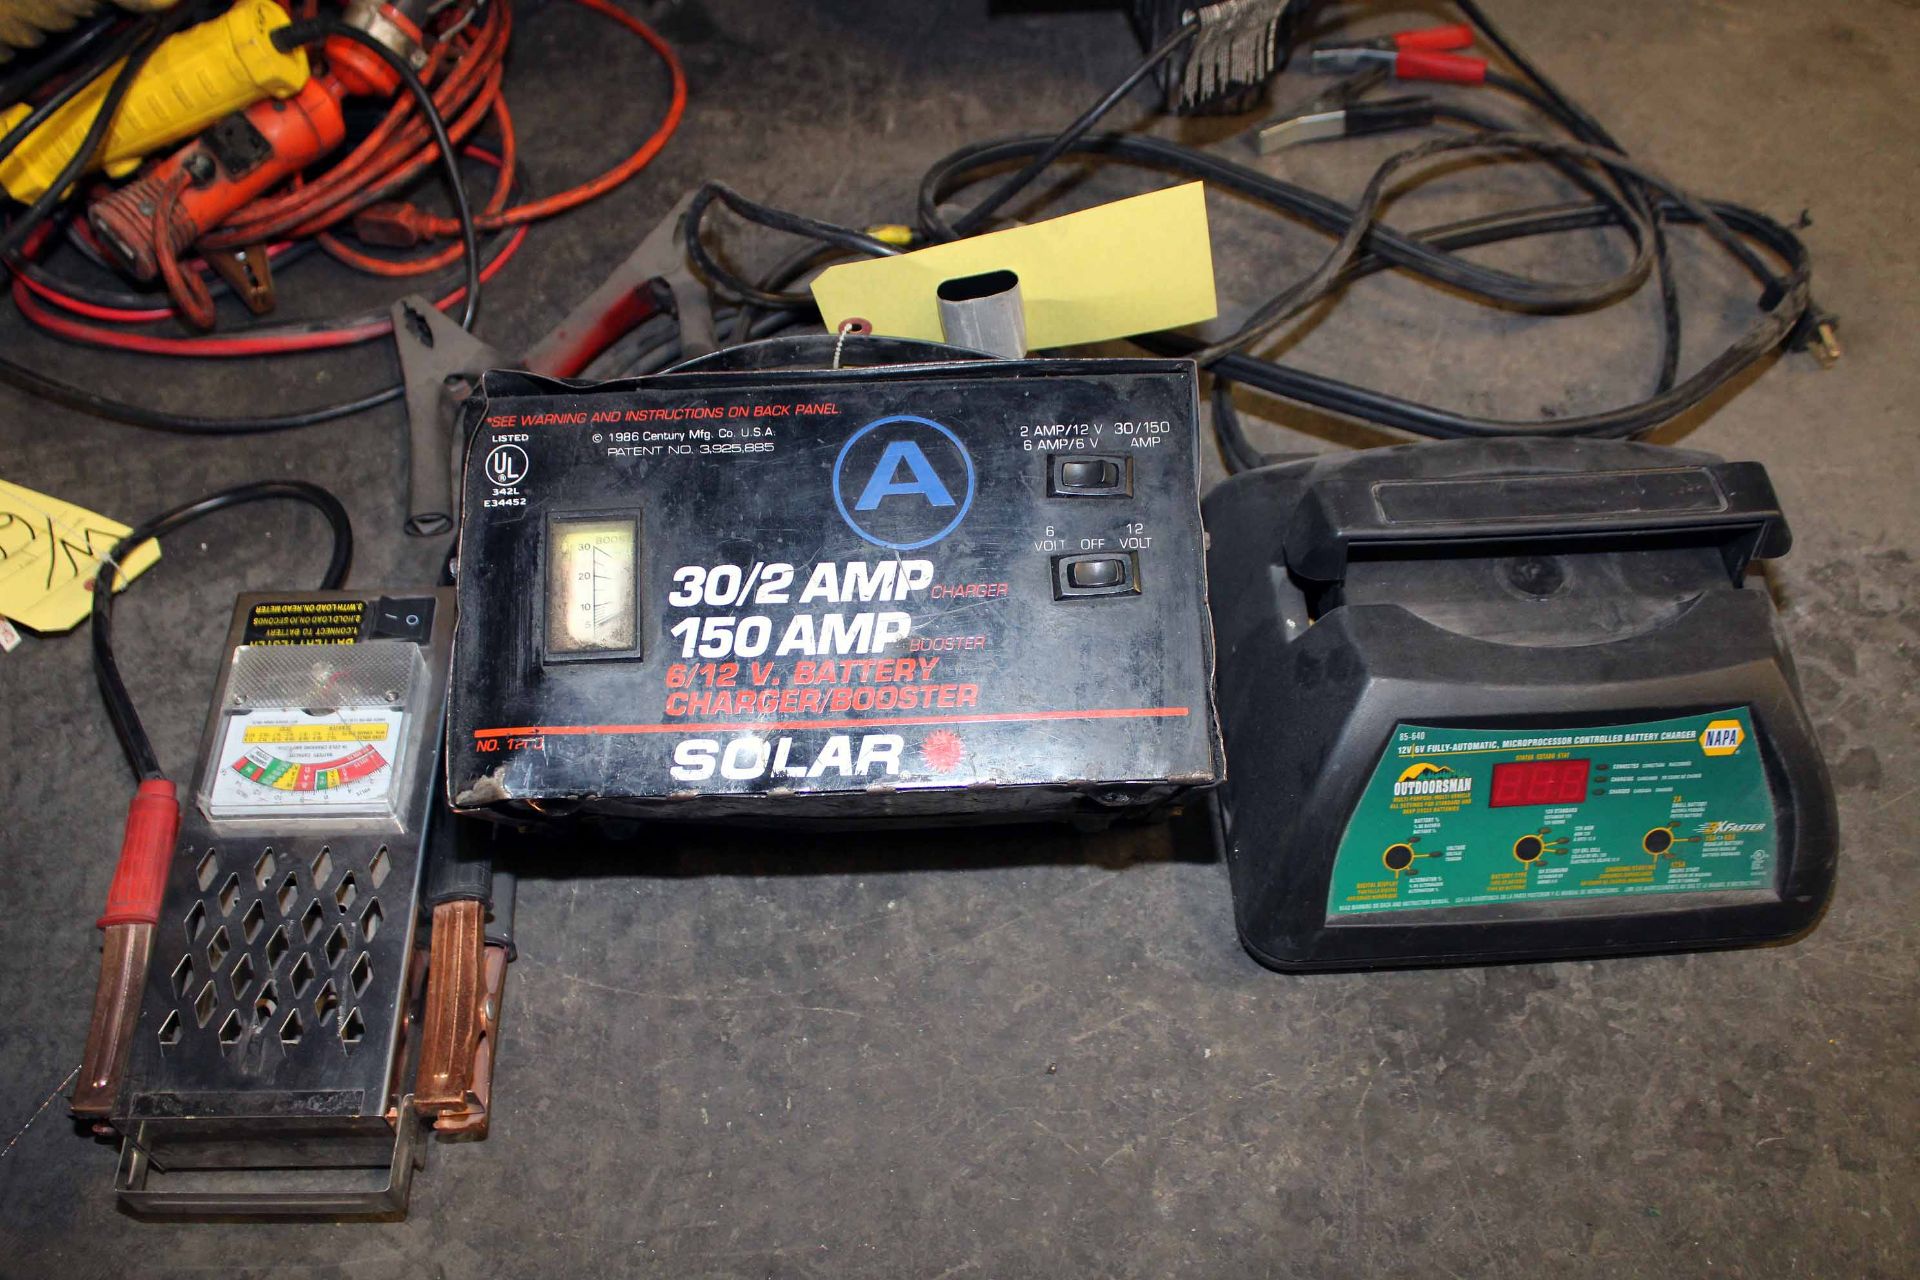 LOT OF BATTERY CHARGERS (2): (1) Solar 6/12 v., 30/2 amp, 150 amp, (1) Napa Mdl. 85-640 & battery